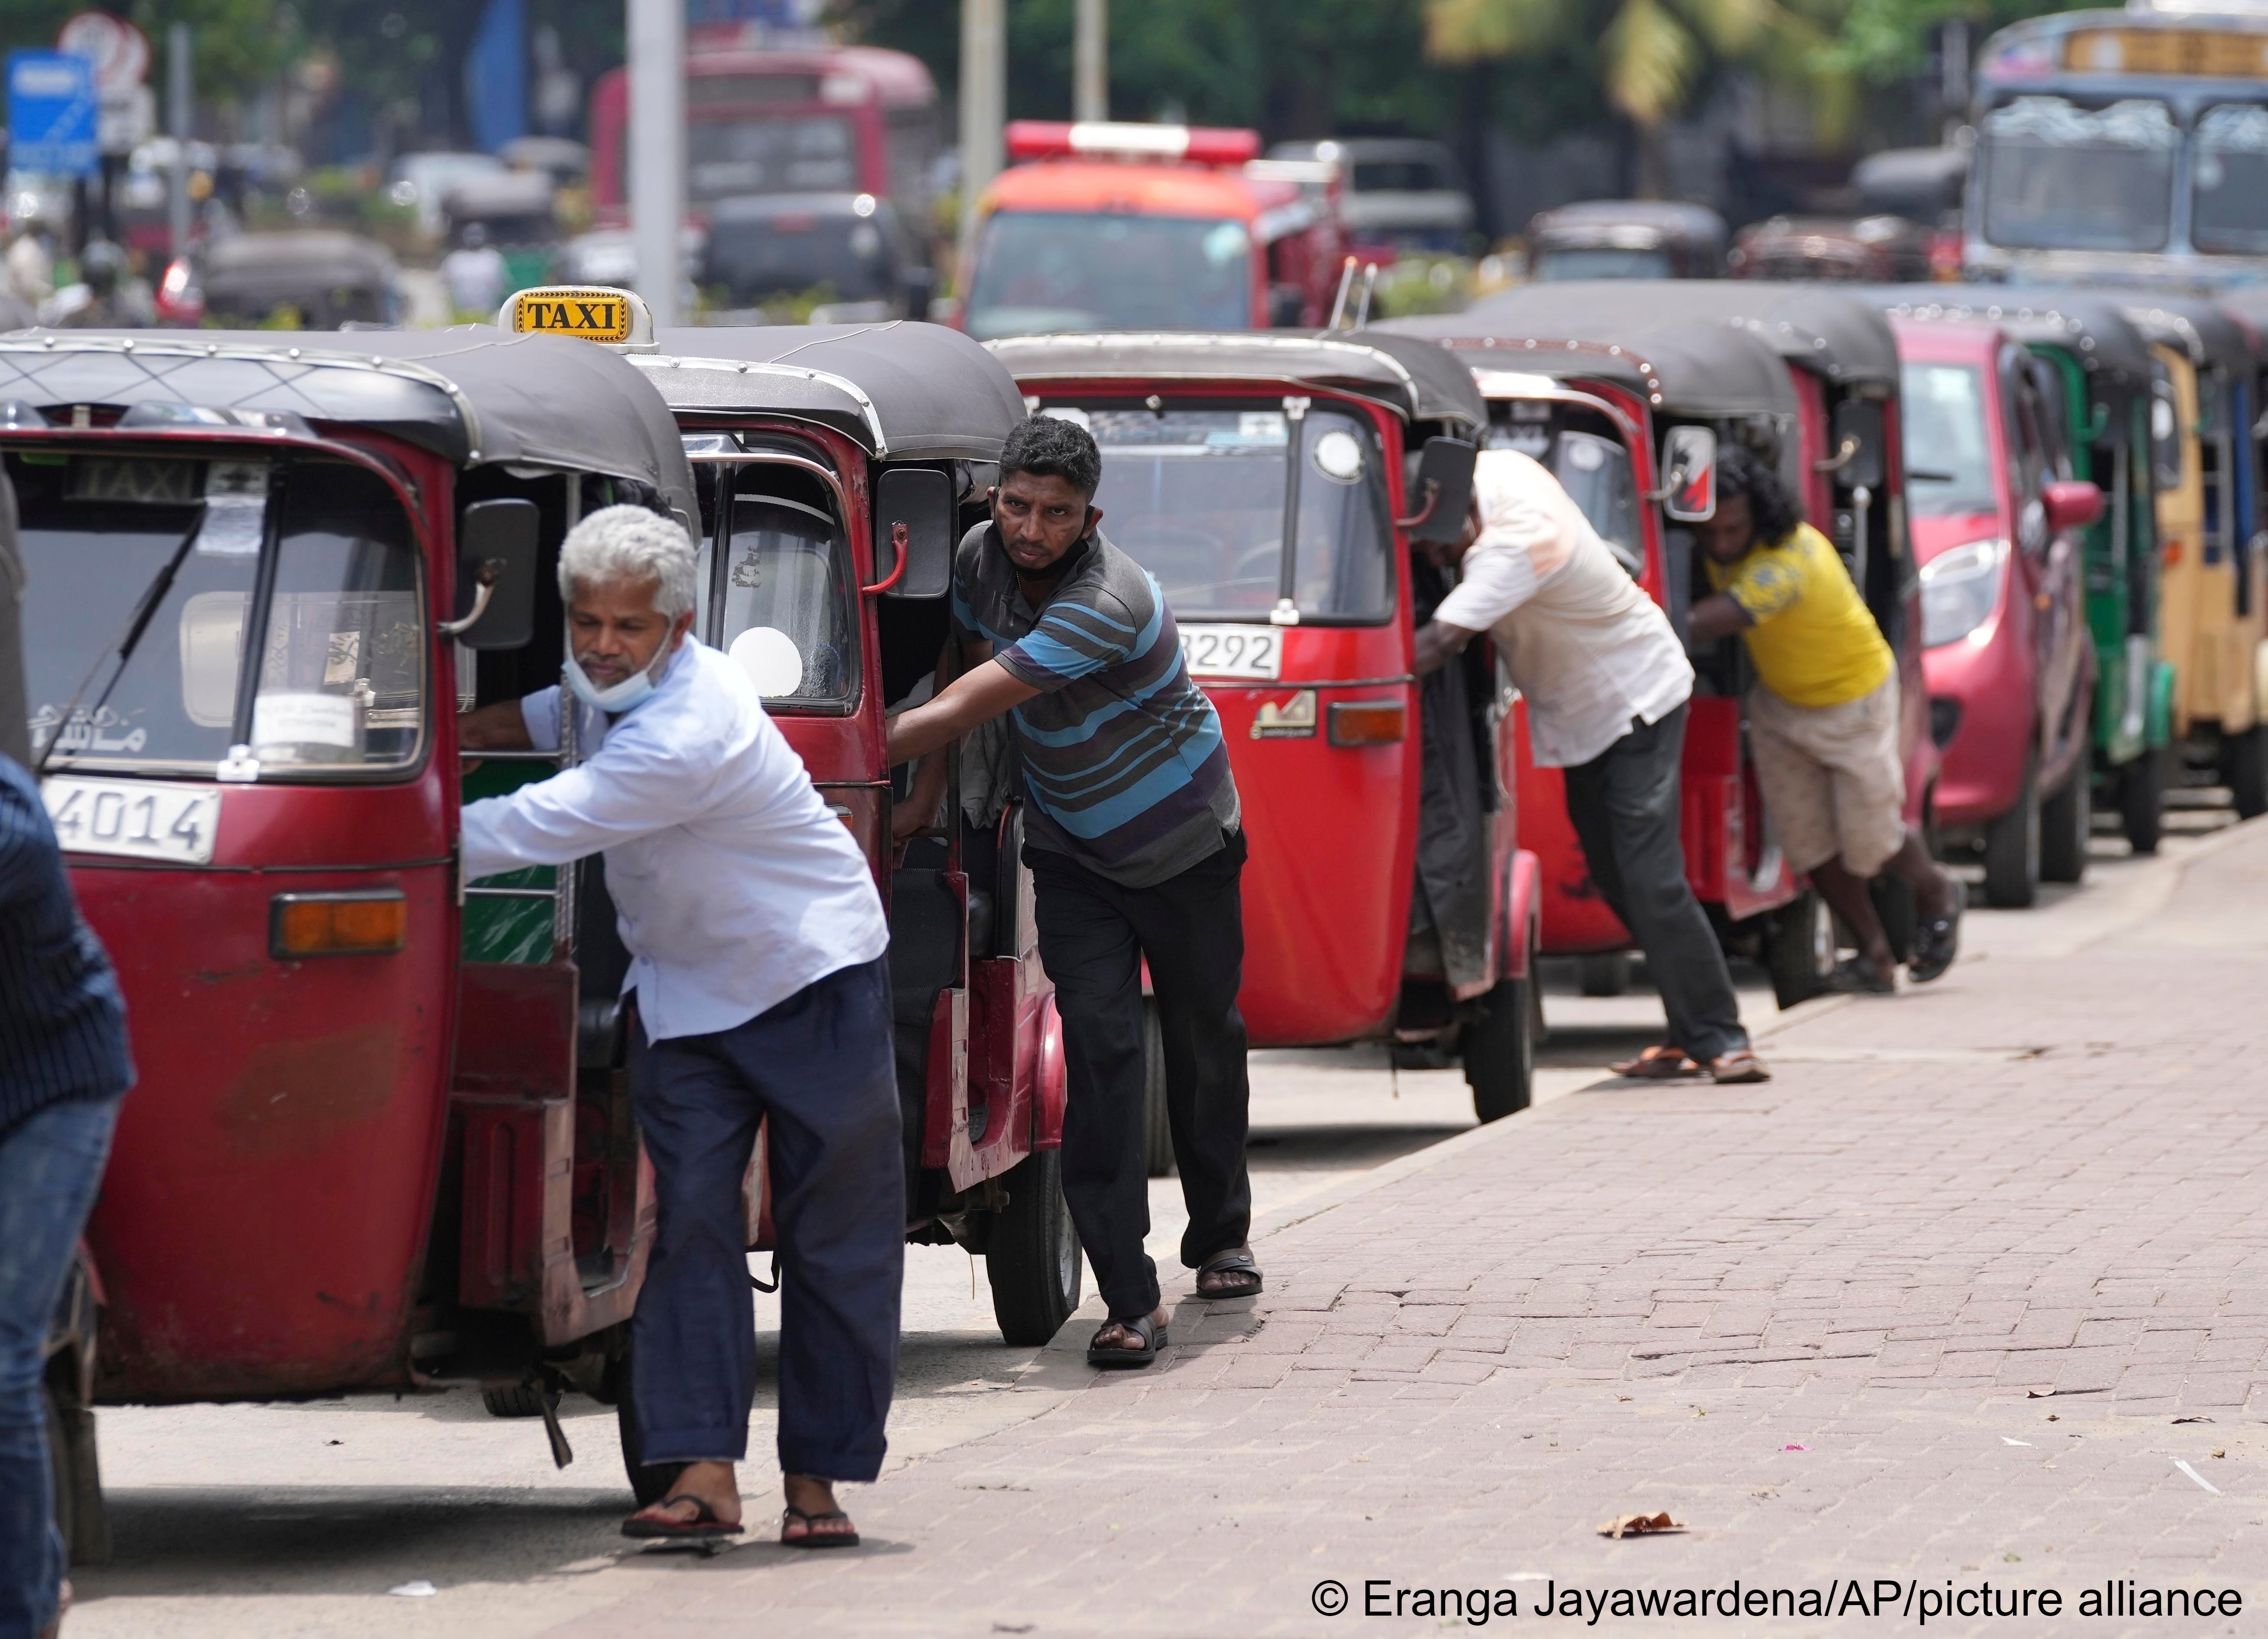 Sri Lanka is now almost without gasoline and faces an acute shortage of other fuels. Authorities have announced nationwide power cuts of up to four hours a day and asked state employees not to work on Fridays, except for those needed for essential services.